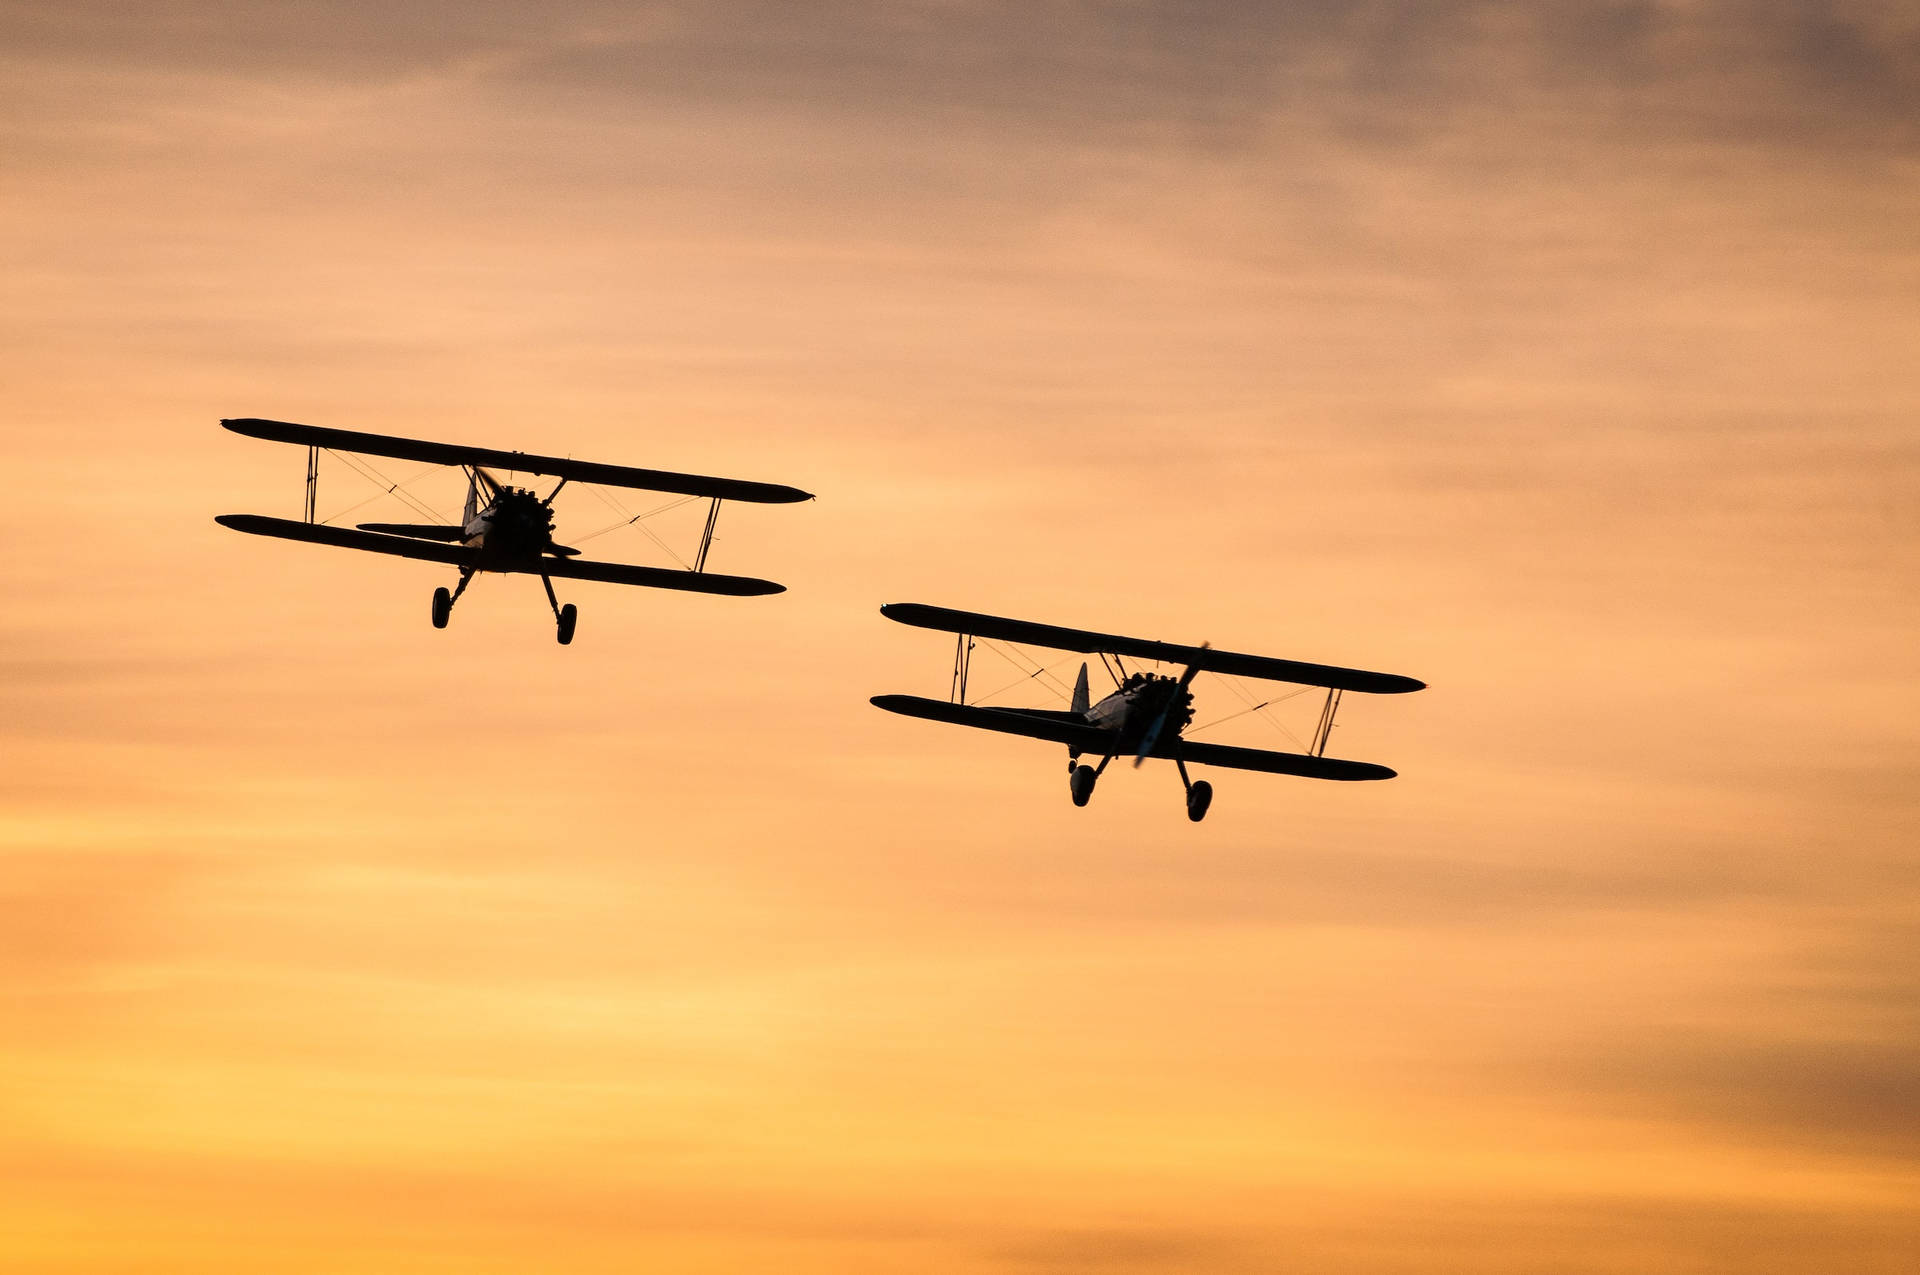 Aviation Black Silhouettes Of Two Biplanes Wallpaper